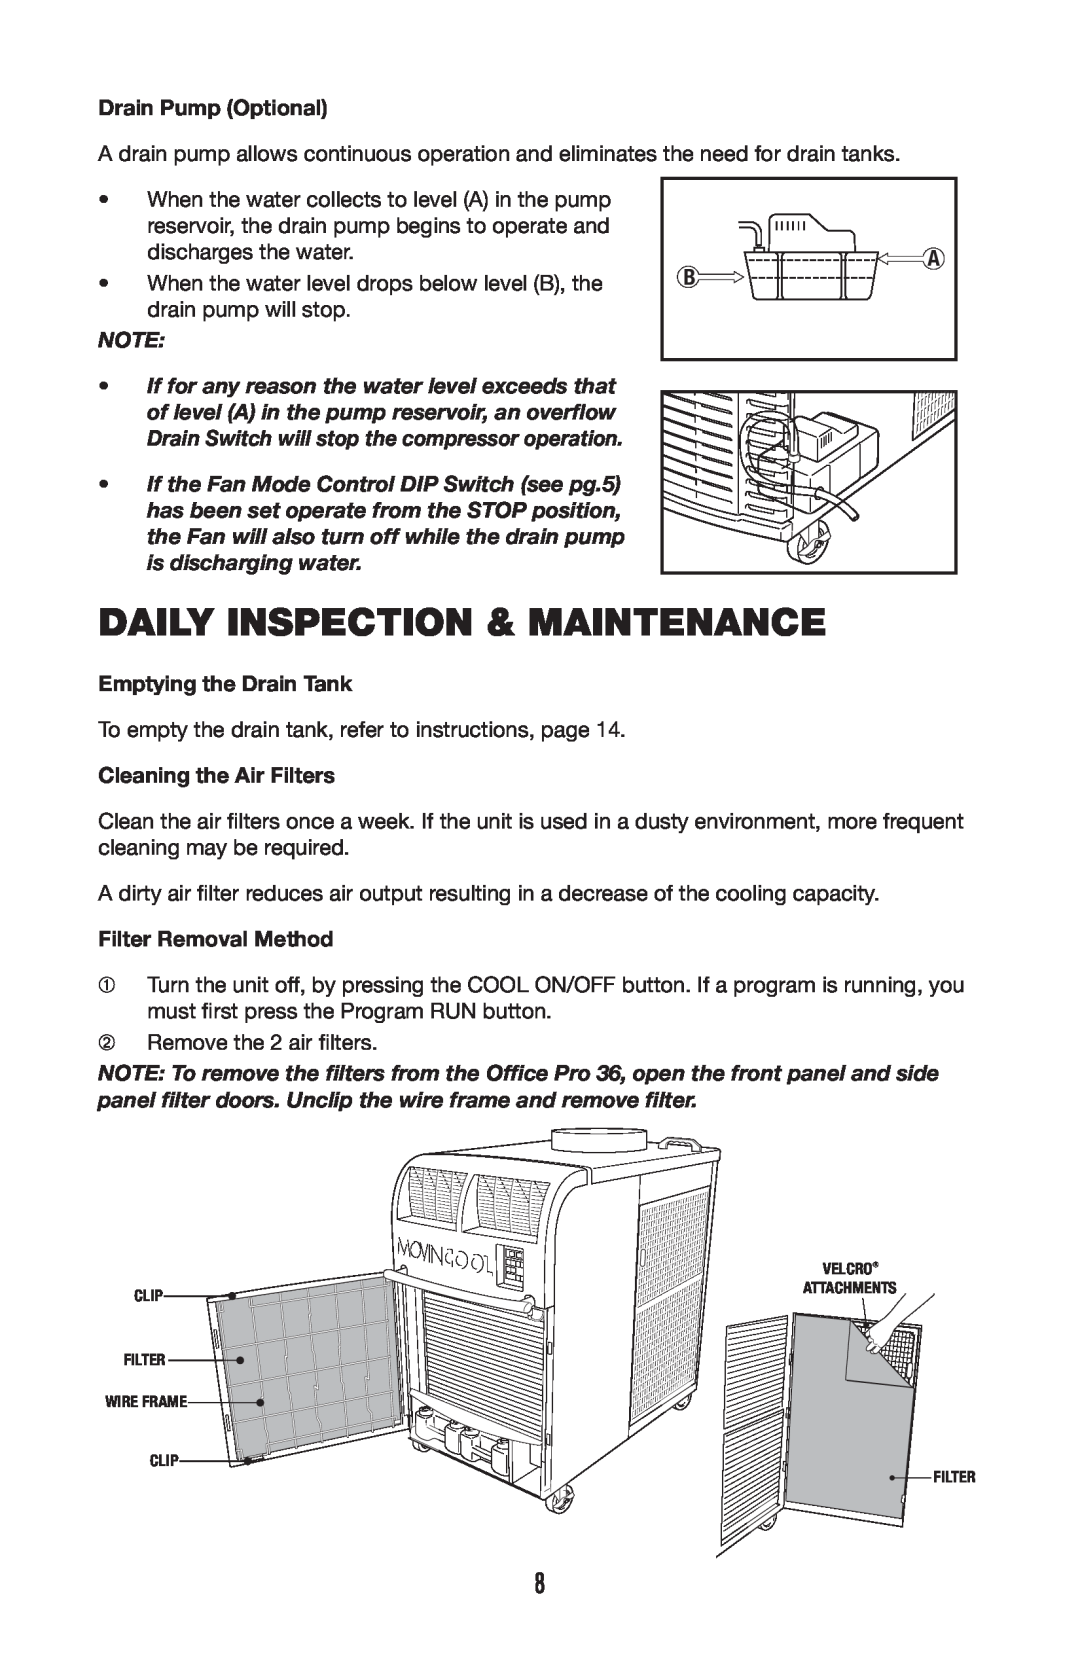 Denso 36 Daily Inspection & Maintenance, Drain Pump Optional, Emptying the Drain Tank, Cleaning the Air Filters 